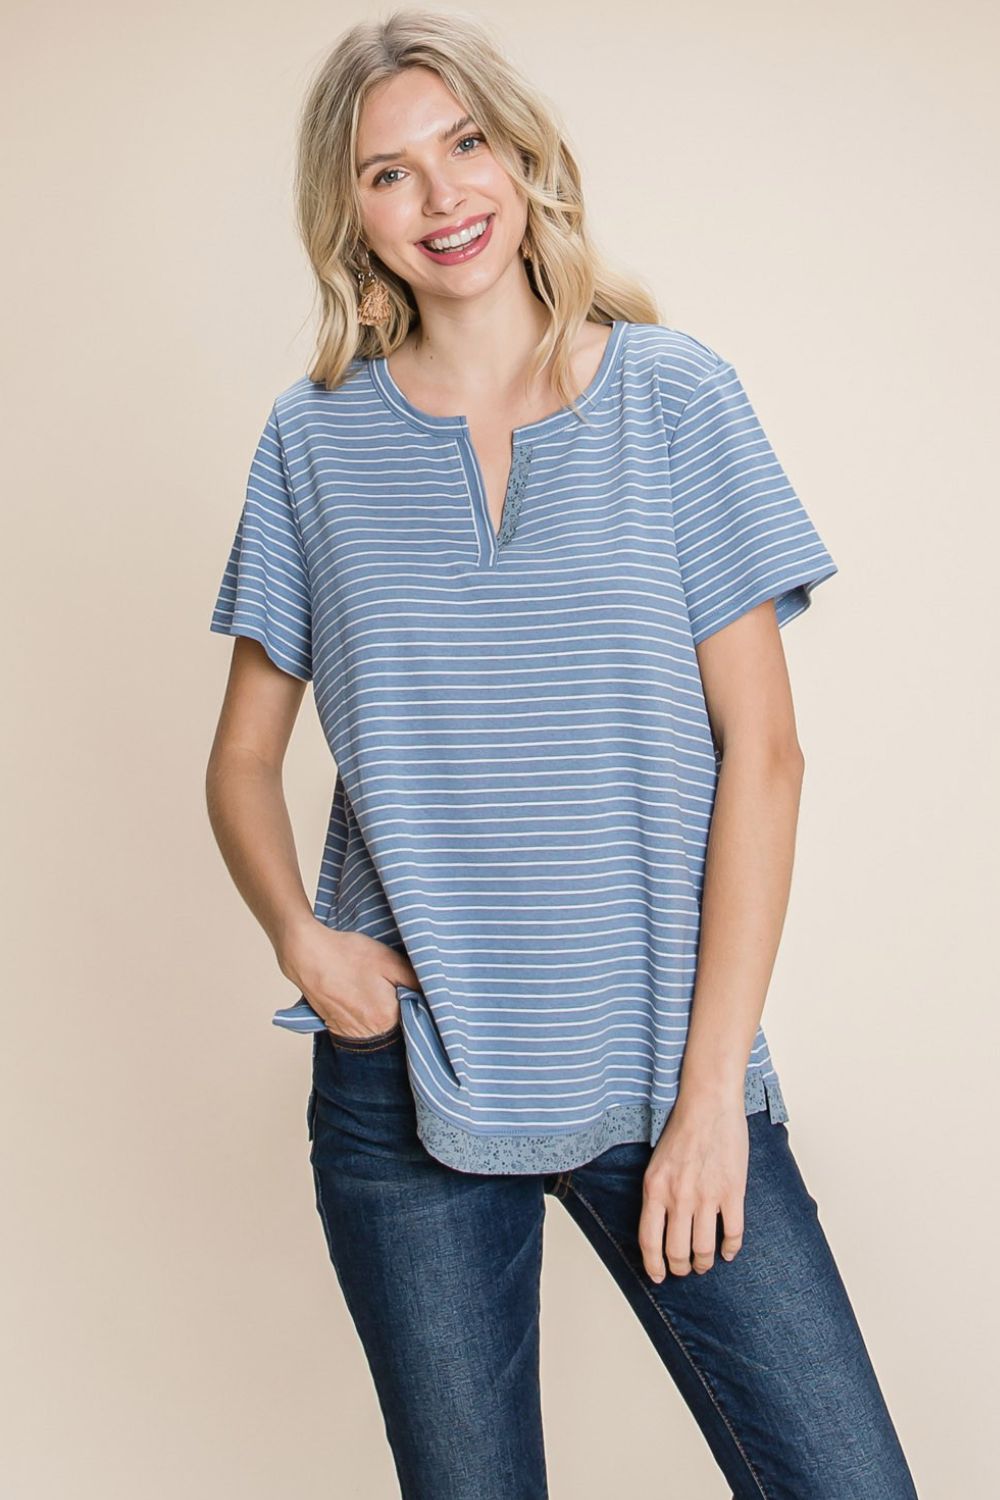 Cotton Bleu by Nu Lab Slit Striped Notched Short Sleeve T-Shirt - Three Bears Boutique